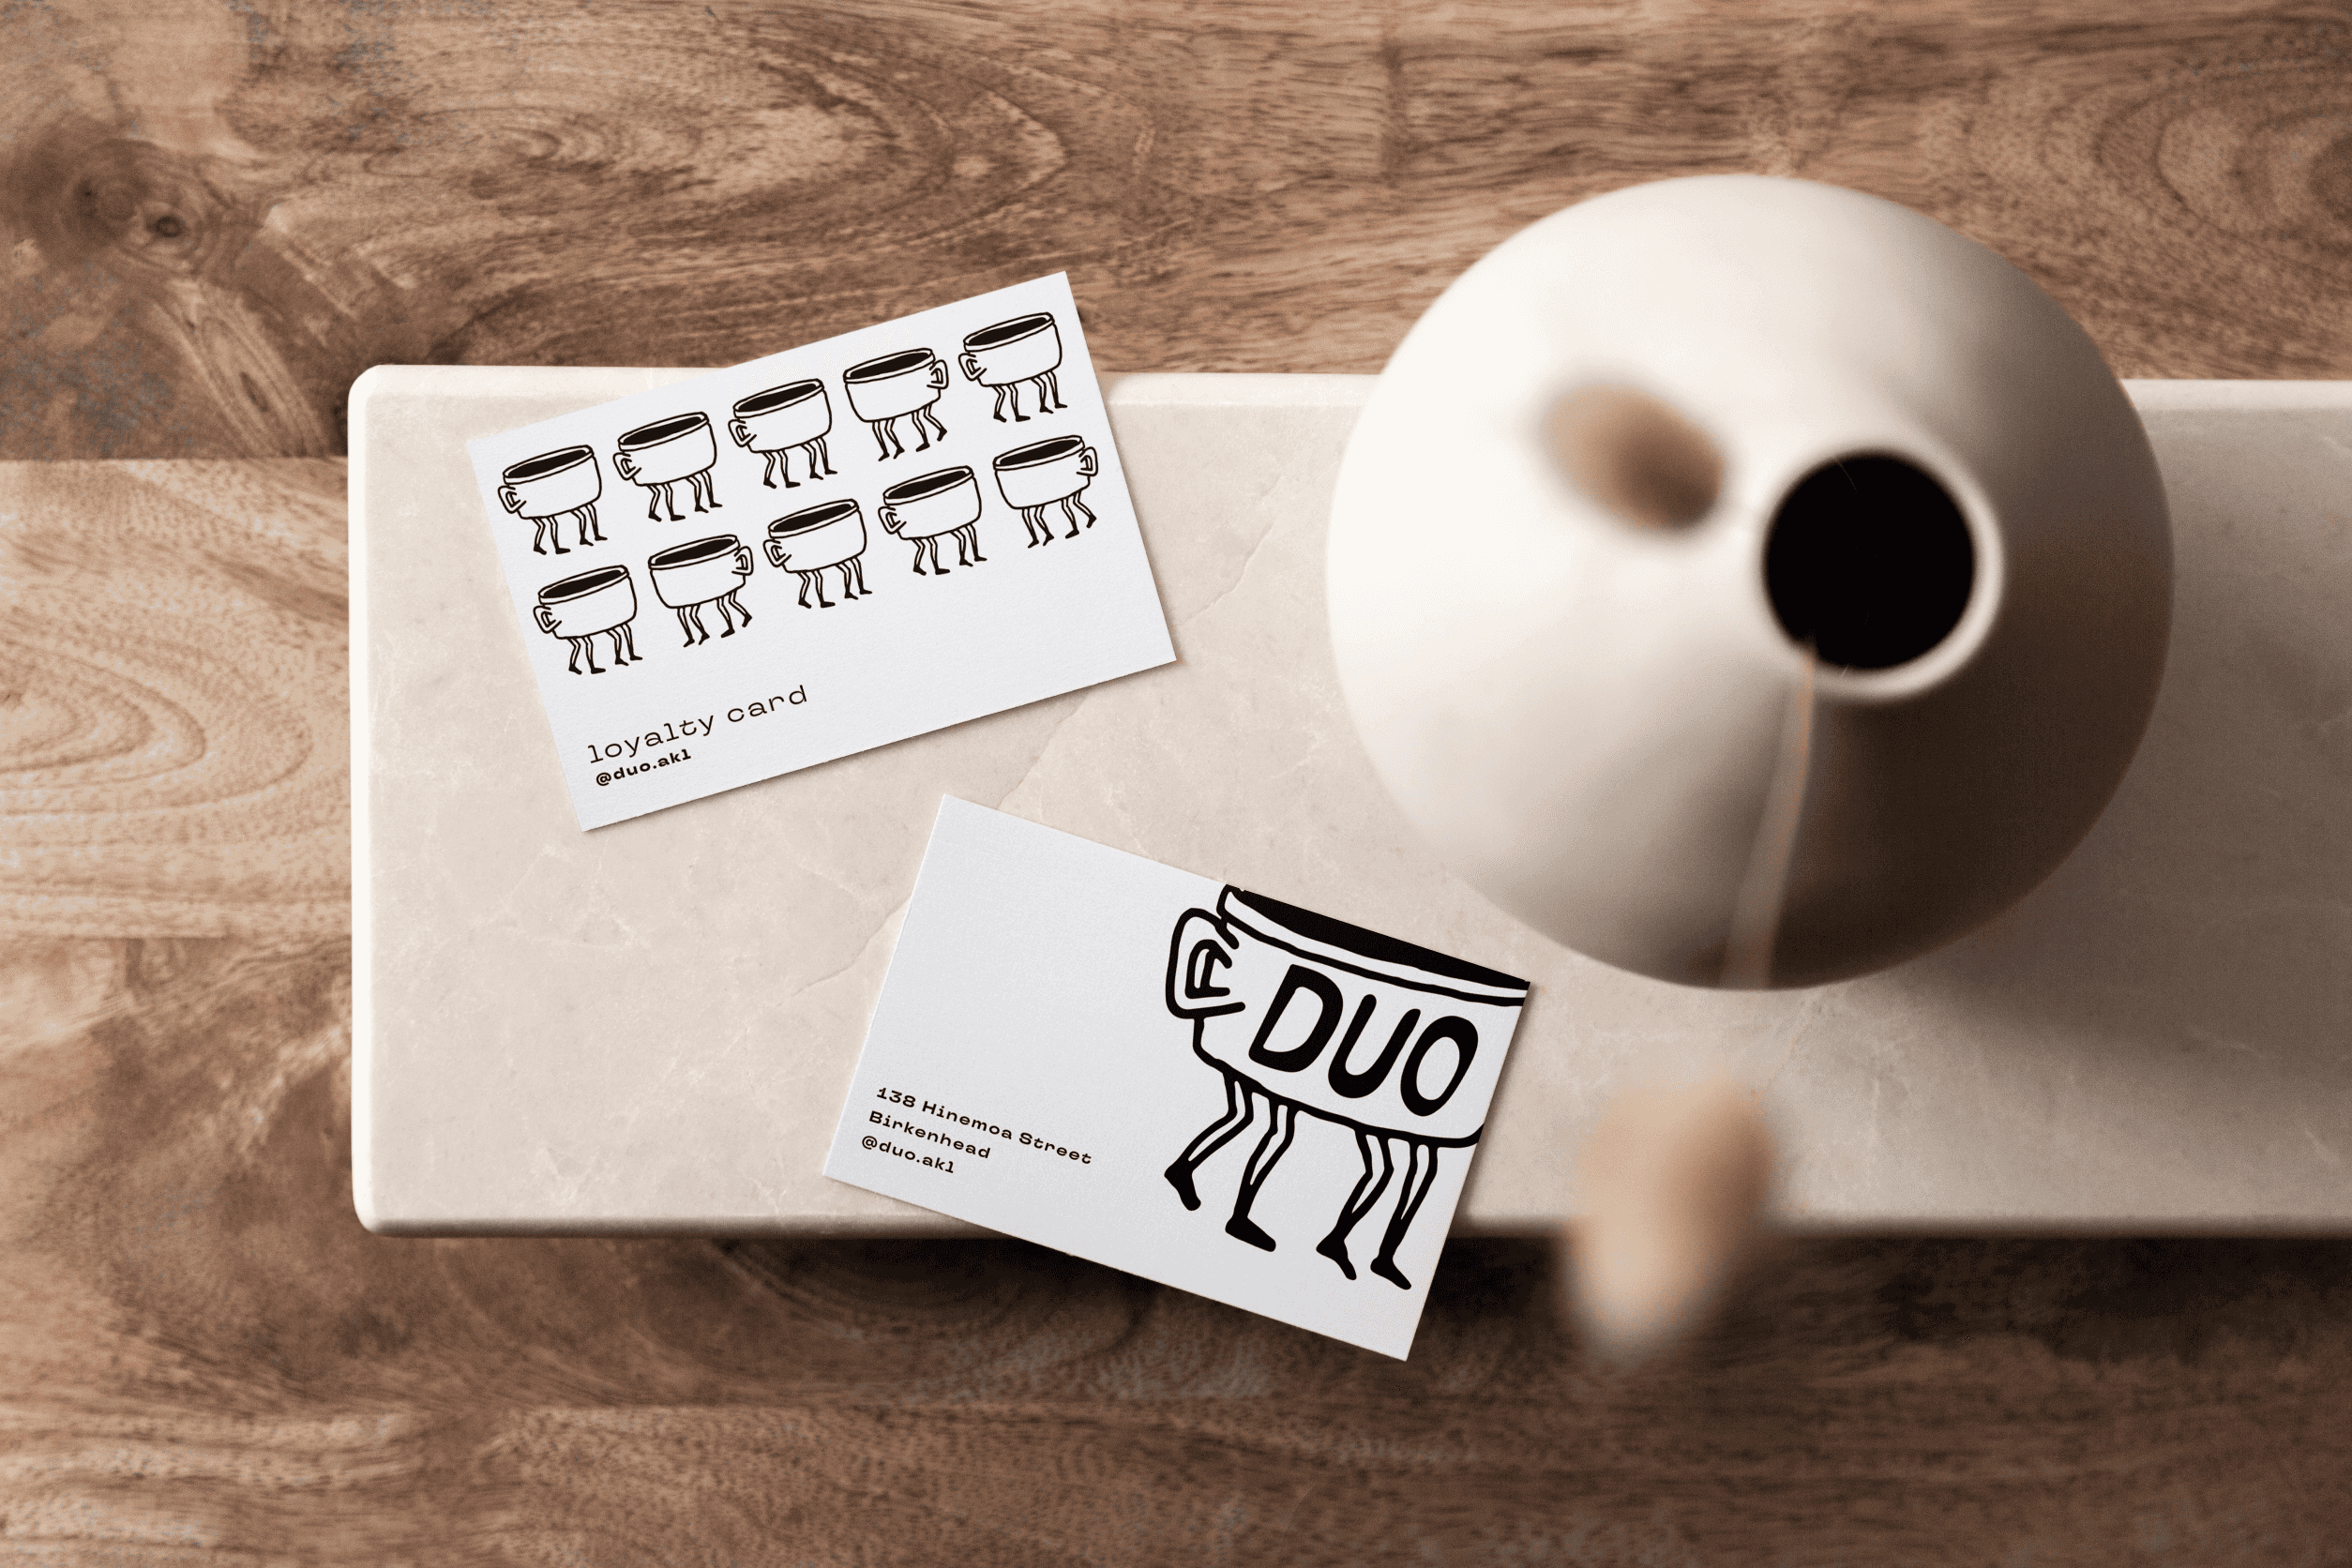 Duo coffee cards next to a cute vase